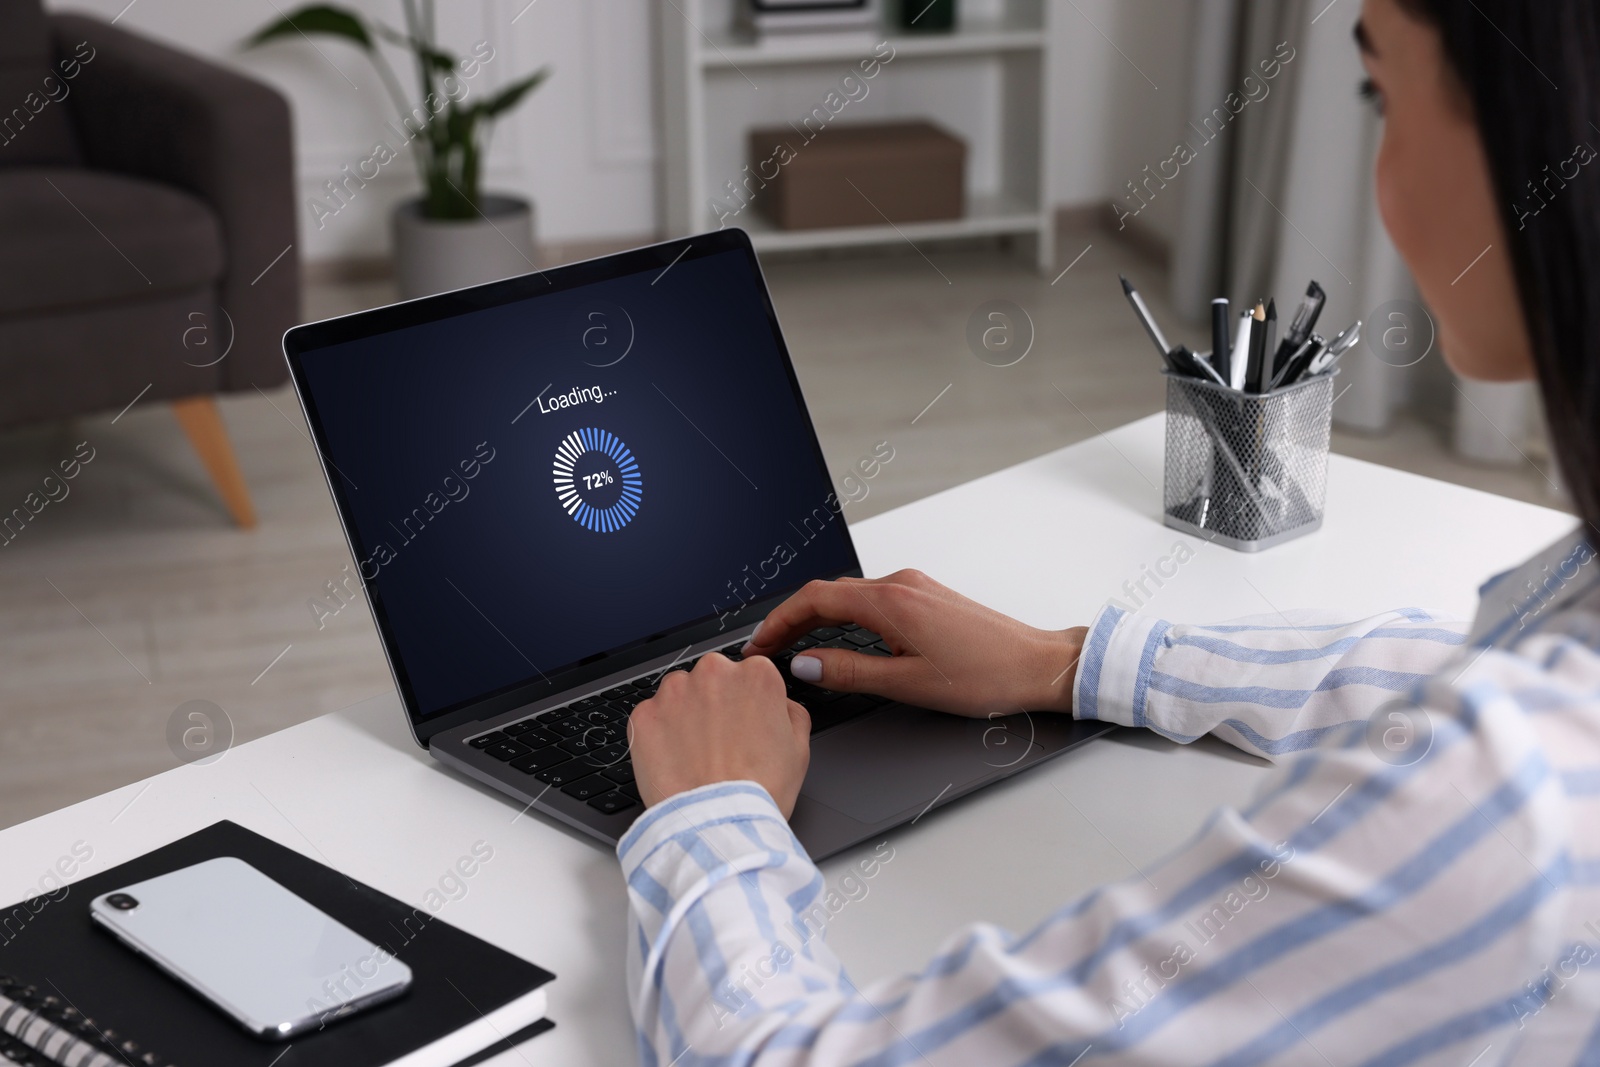 Image of Loading screen displaying progress. Woman working on laptop at table indoors, closeup